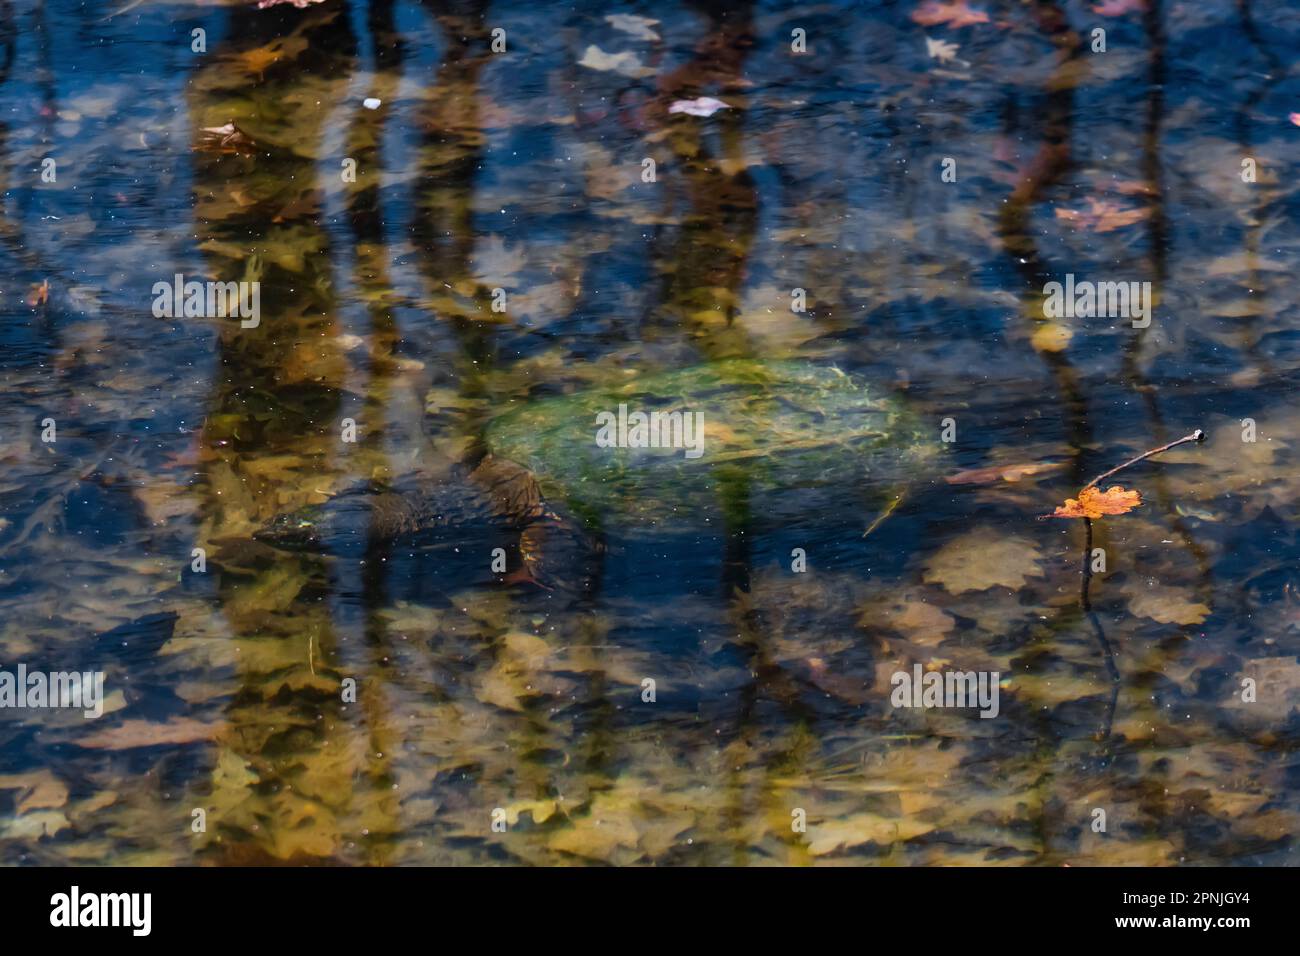 Common Snapping Turtle, Chelydra serpentina, underwater in a lake in Canadian Lakes, Michigan, USA Stock Photo